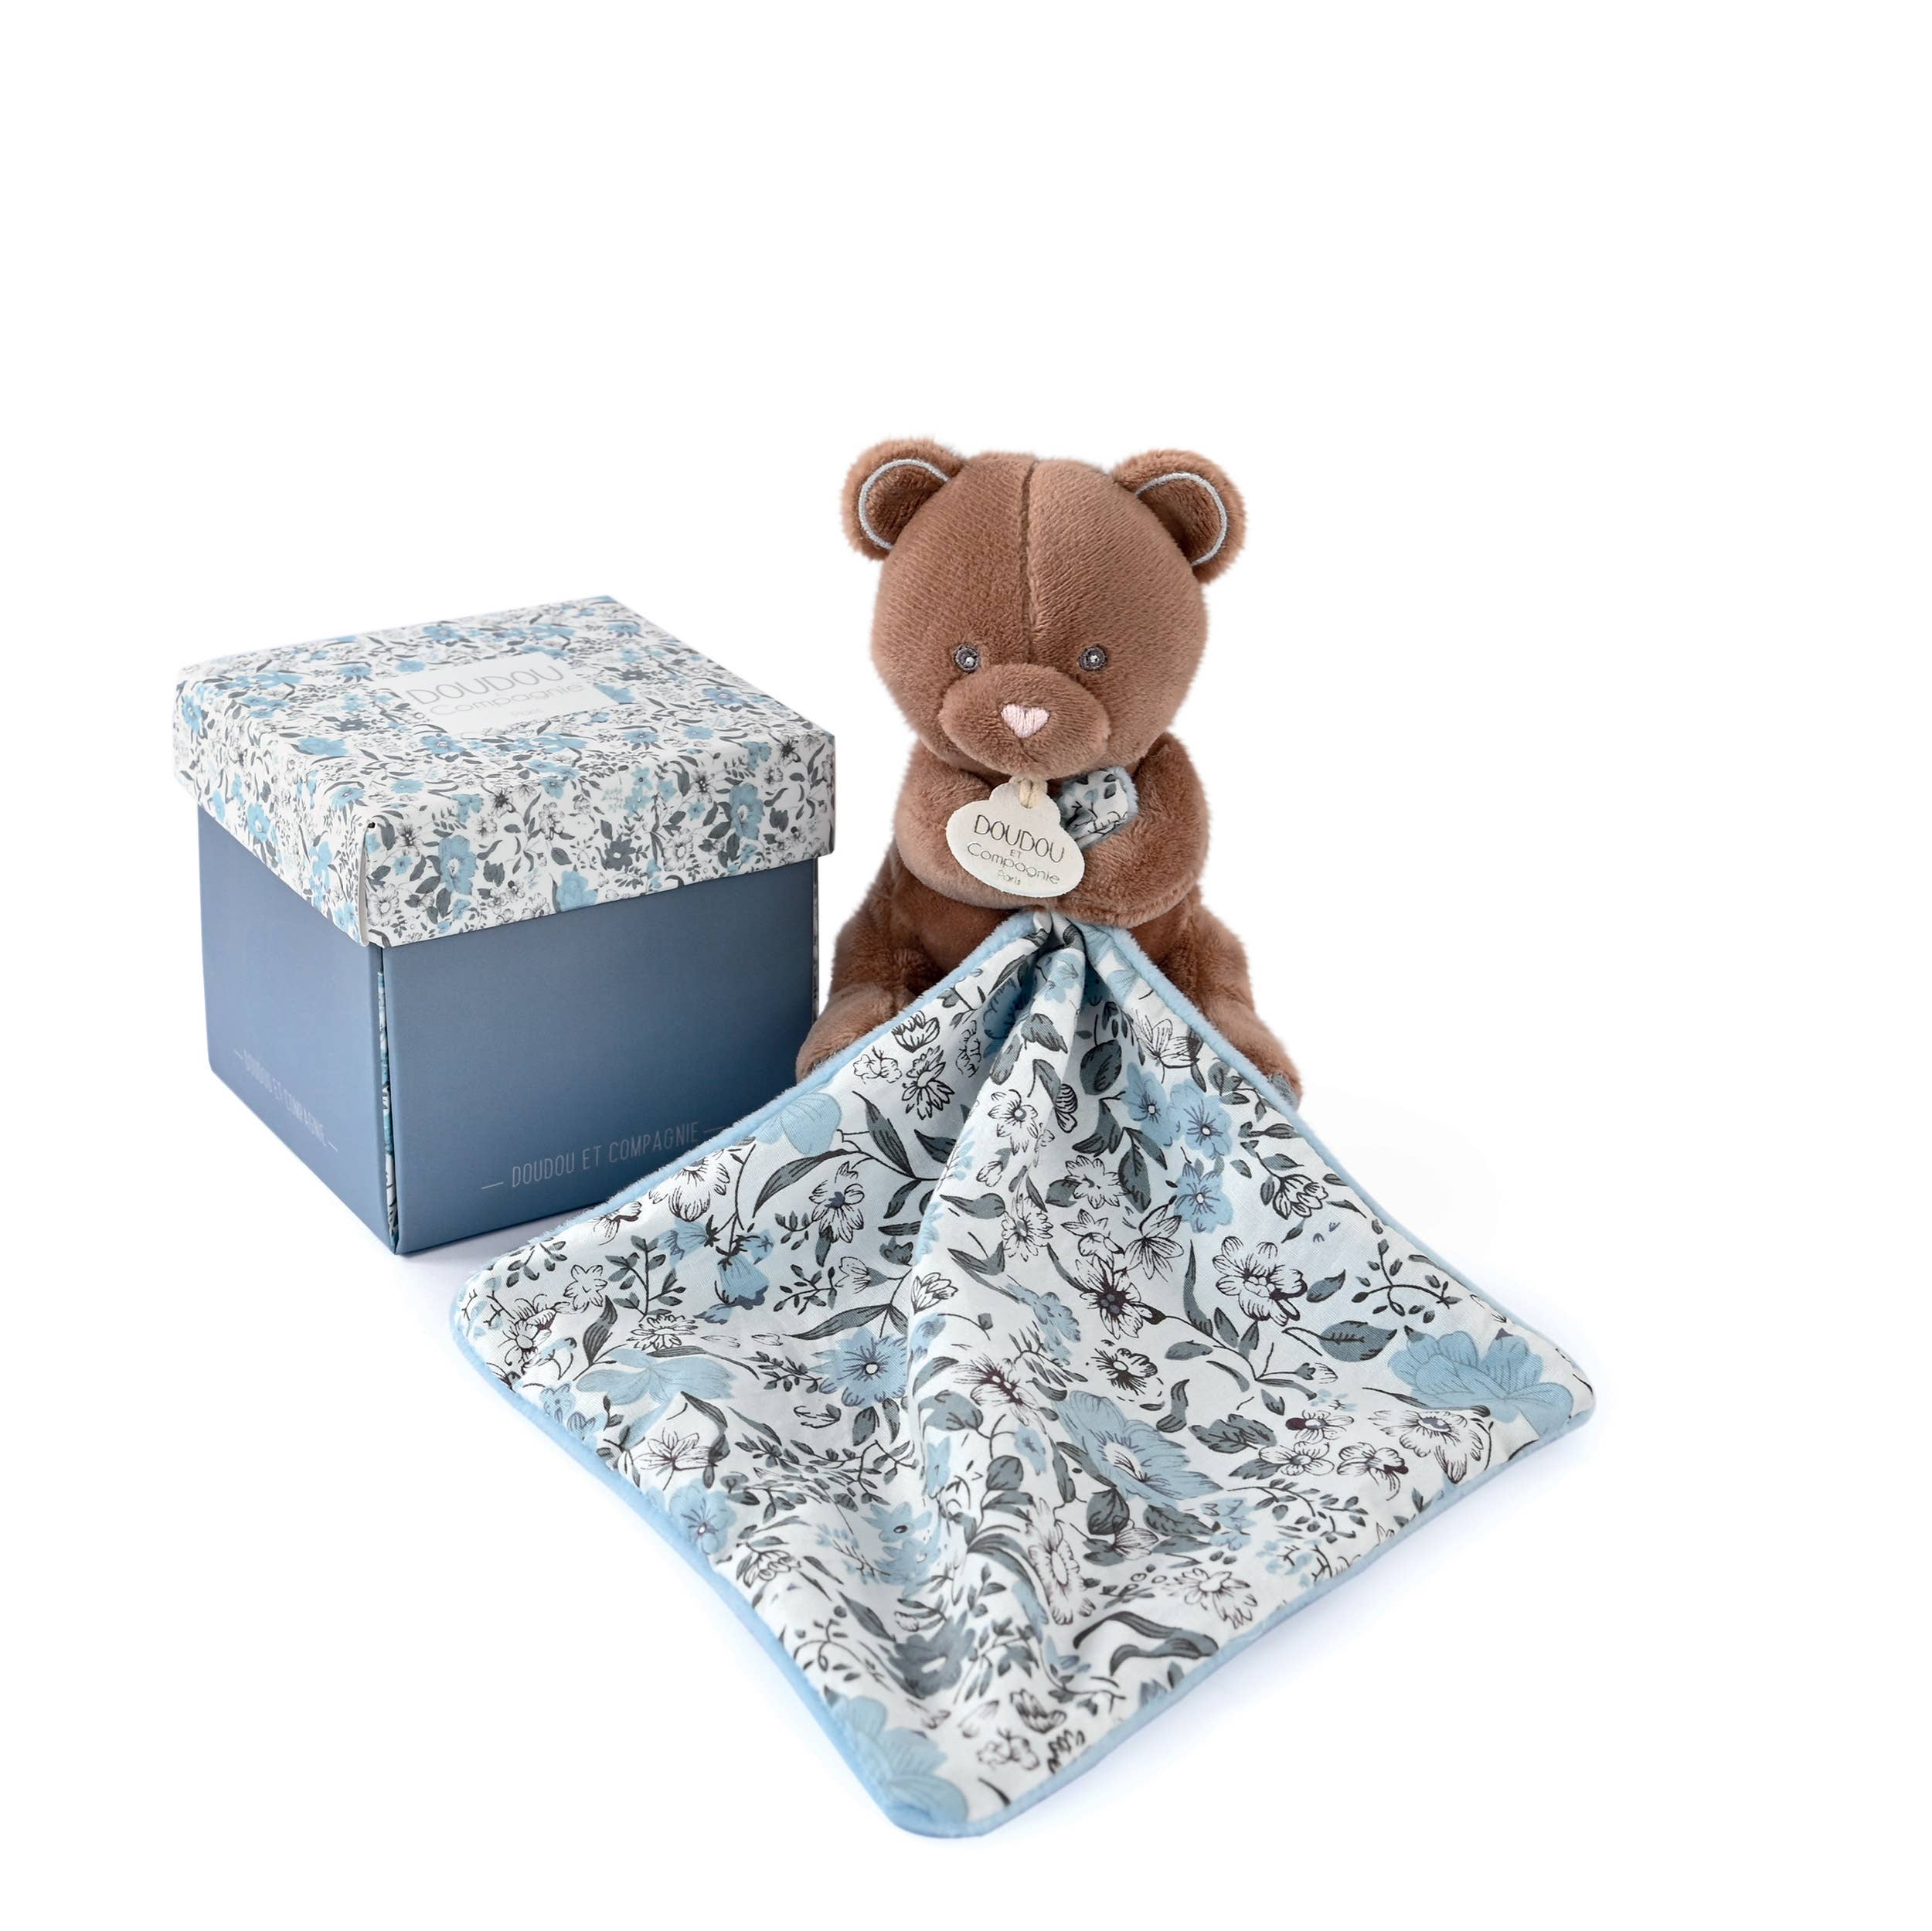 Doudou et Compagnie Boh'aime Bear Puppet with floral blanket